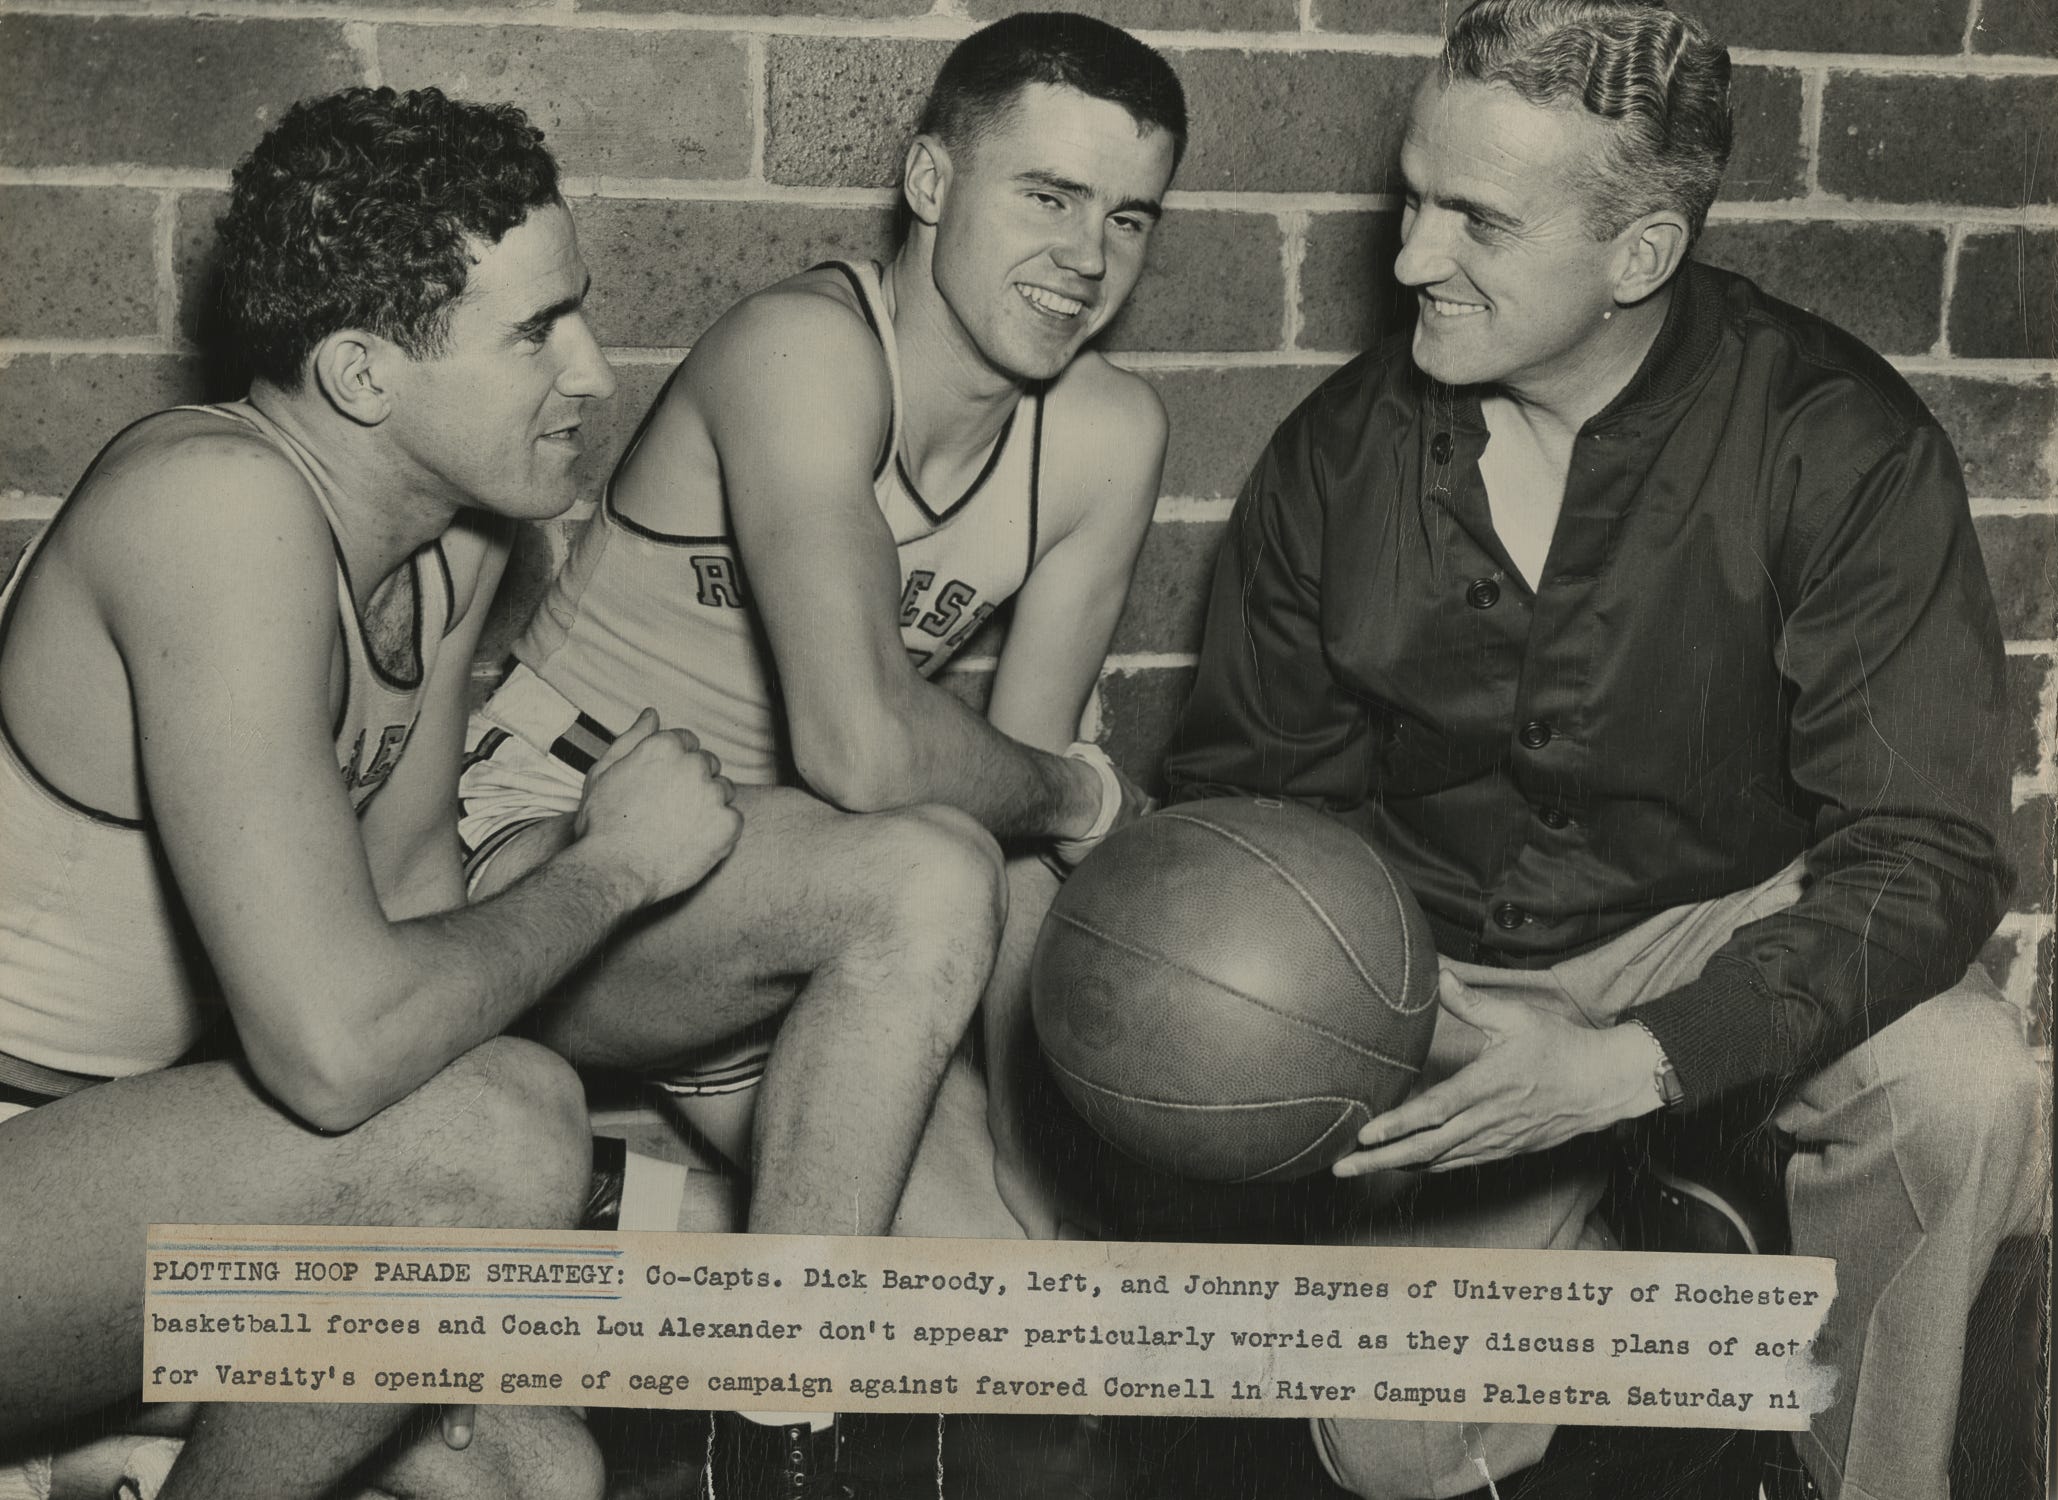 In 1946, months after returning home from service, Dick Baroody (left) and Johnny Baynes (middle) rejoined coach Lou Alexander (right) as co-captains of the basketball team. This photo was taken before the 1946-47 season opener against Cornell.